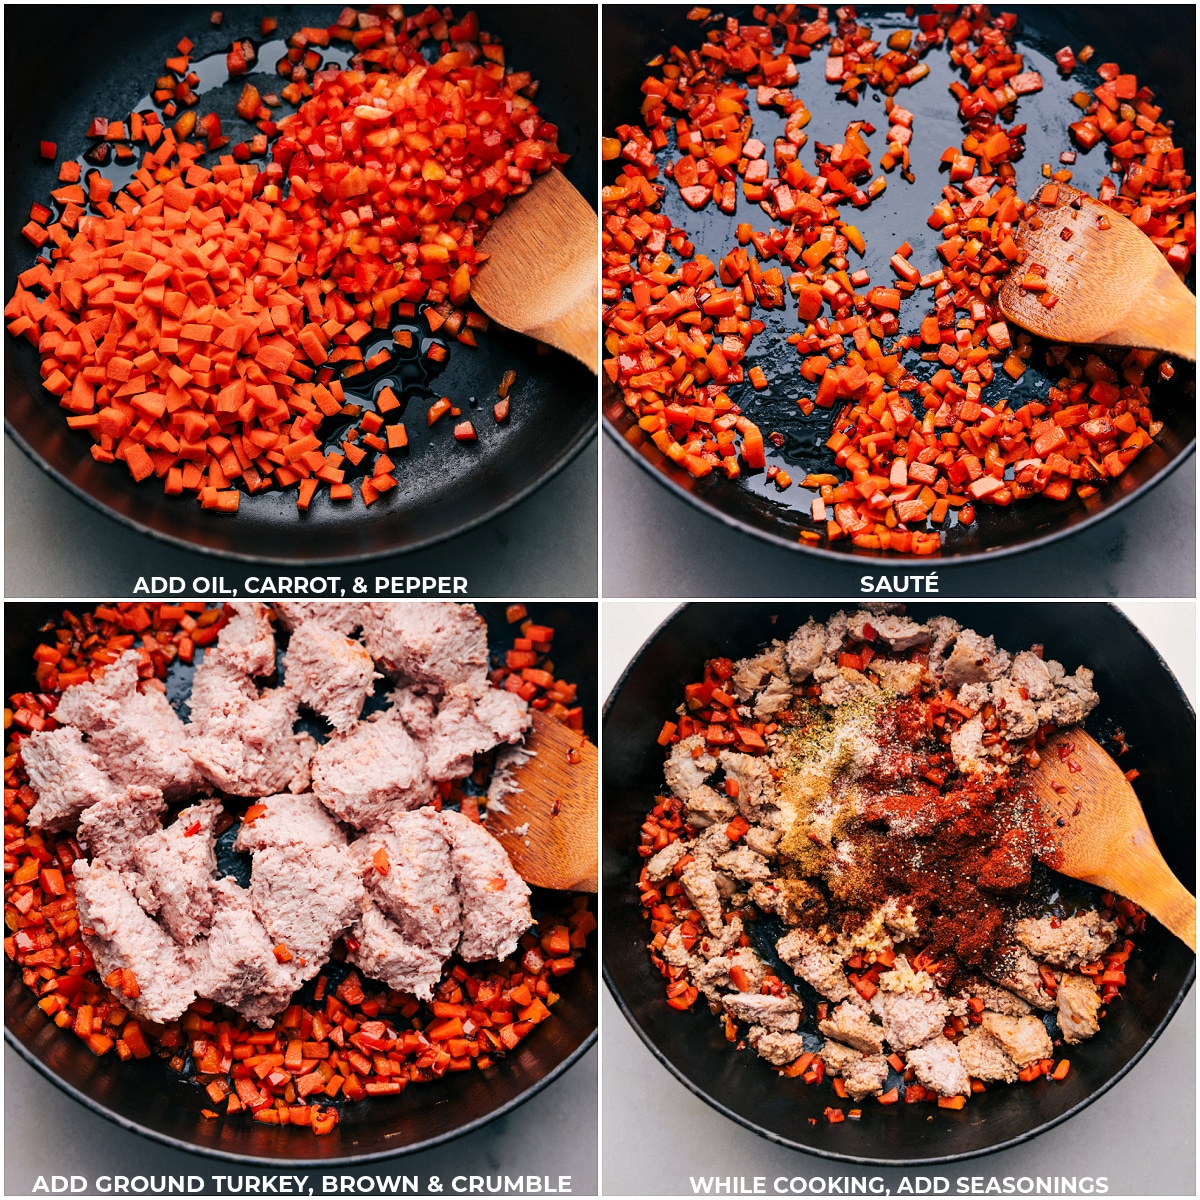 Oil, carrots, pepper, ground turkey, and seasonings being added to a skillet for this ground turkey meal prep.